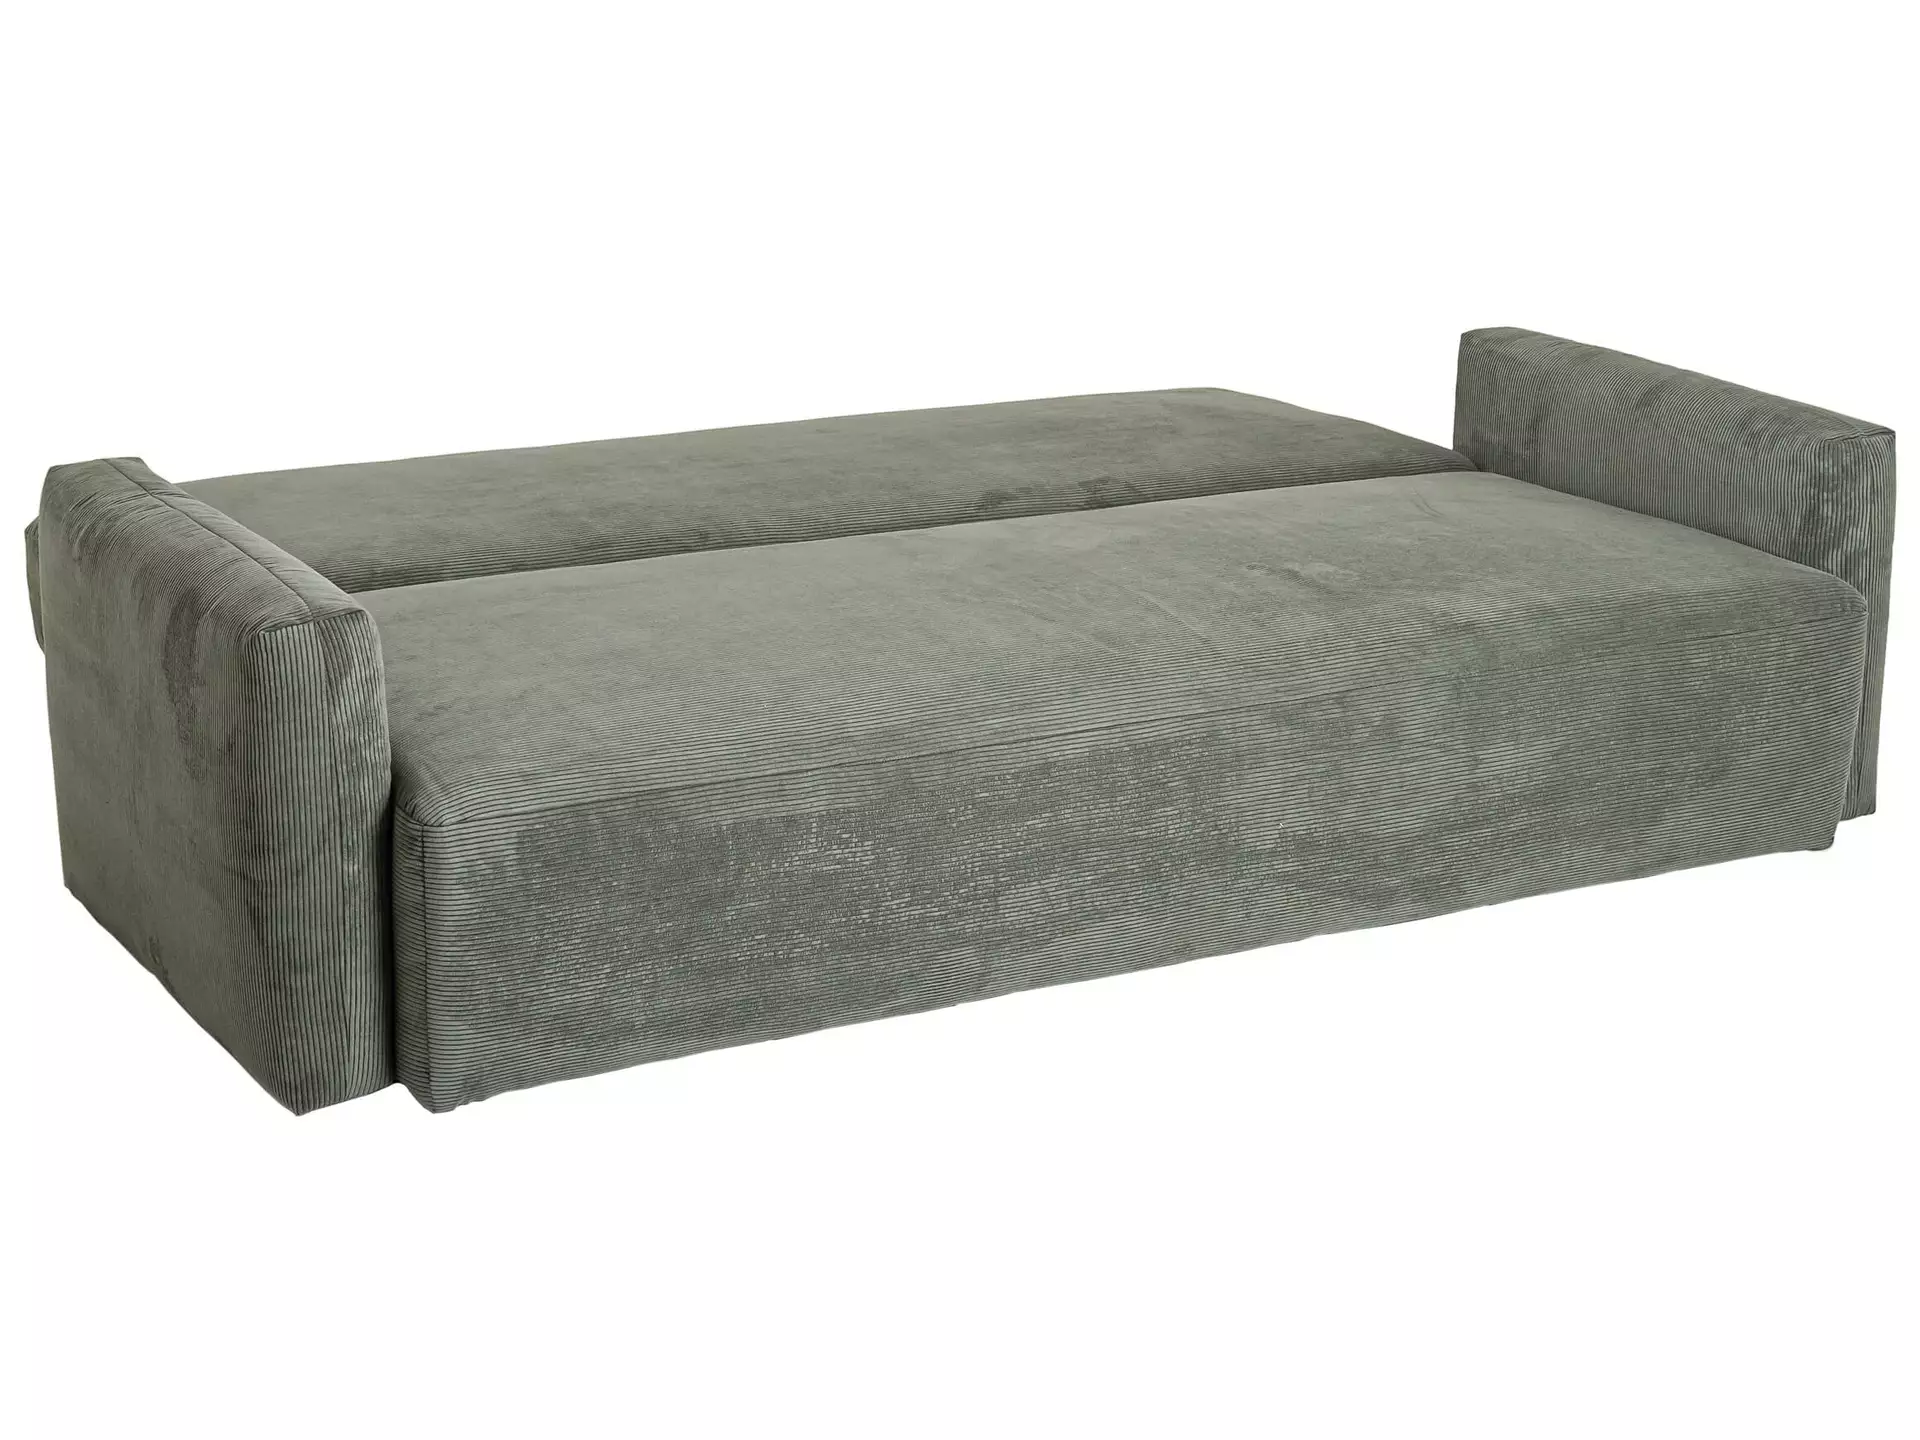 Bettsofa Antonia Candy / Farbe: Oliv / Bezugsmaterial: Stoff